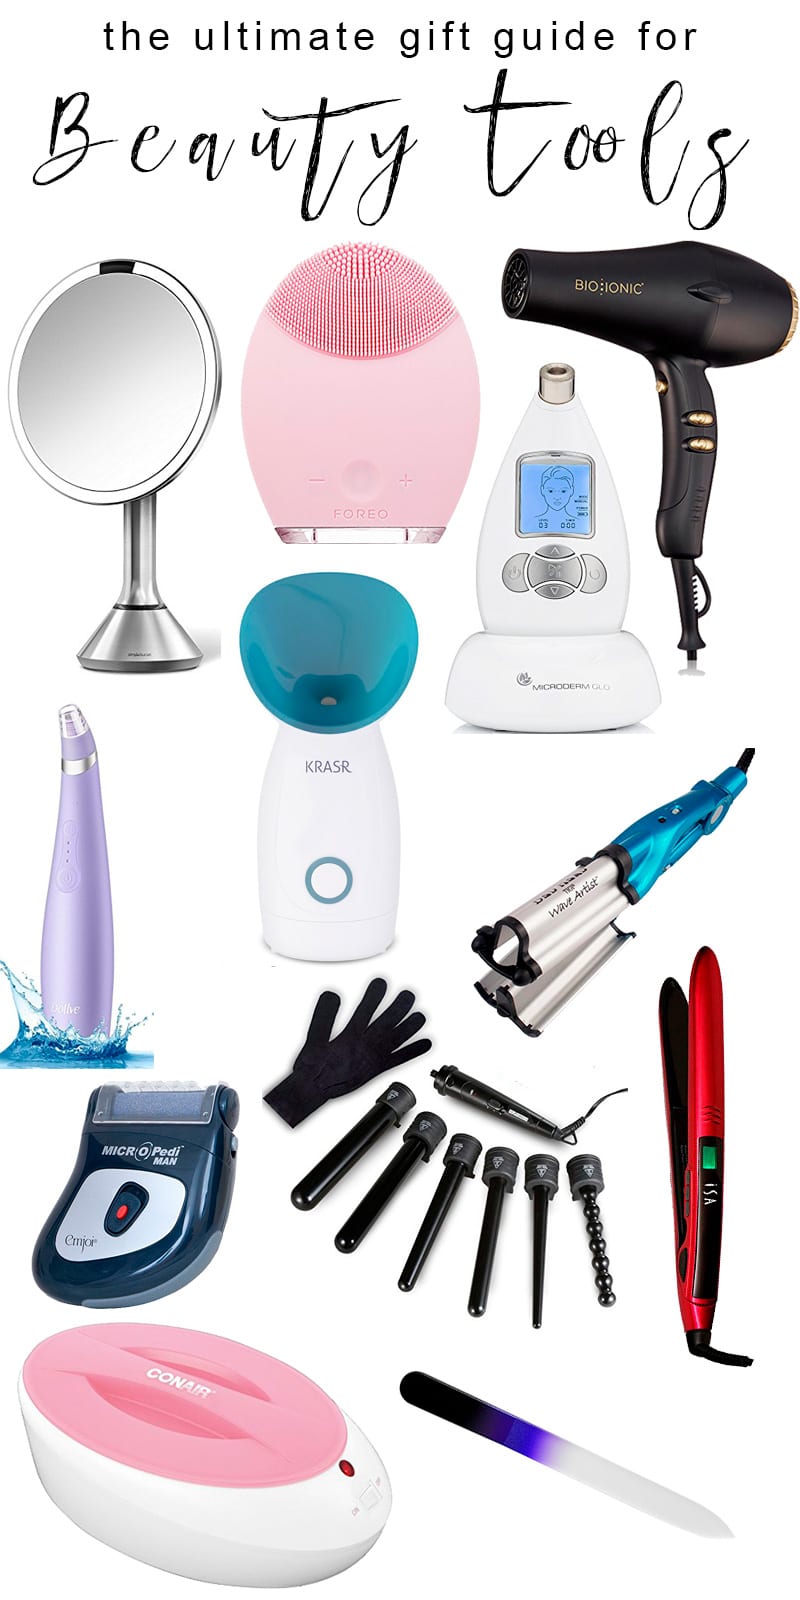 Beauty Tools Gift Guide - the best beauty tools that need to be on your Amazon Wish List!